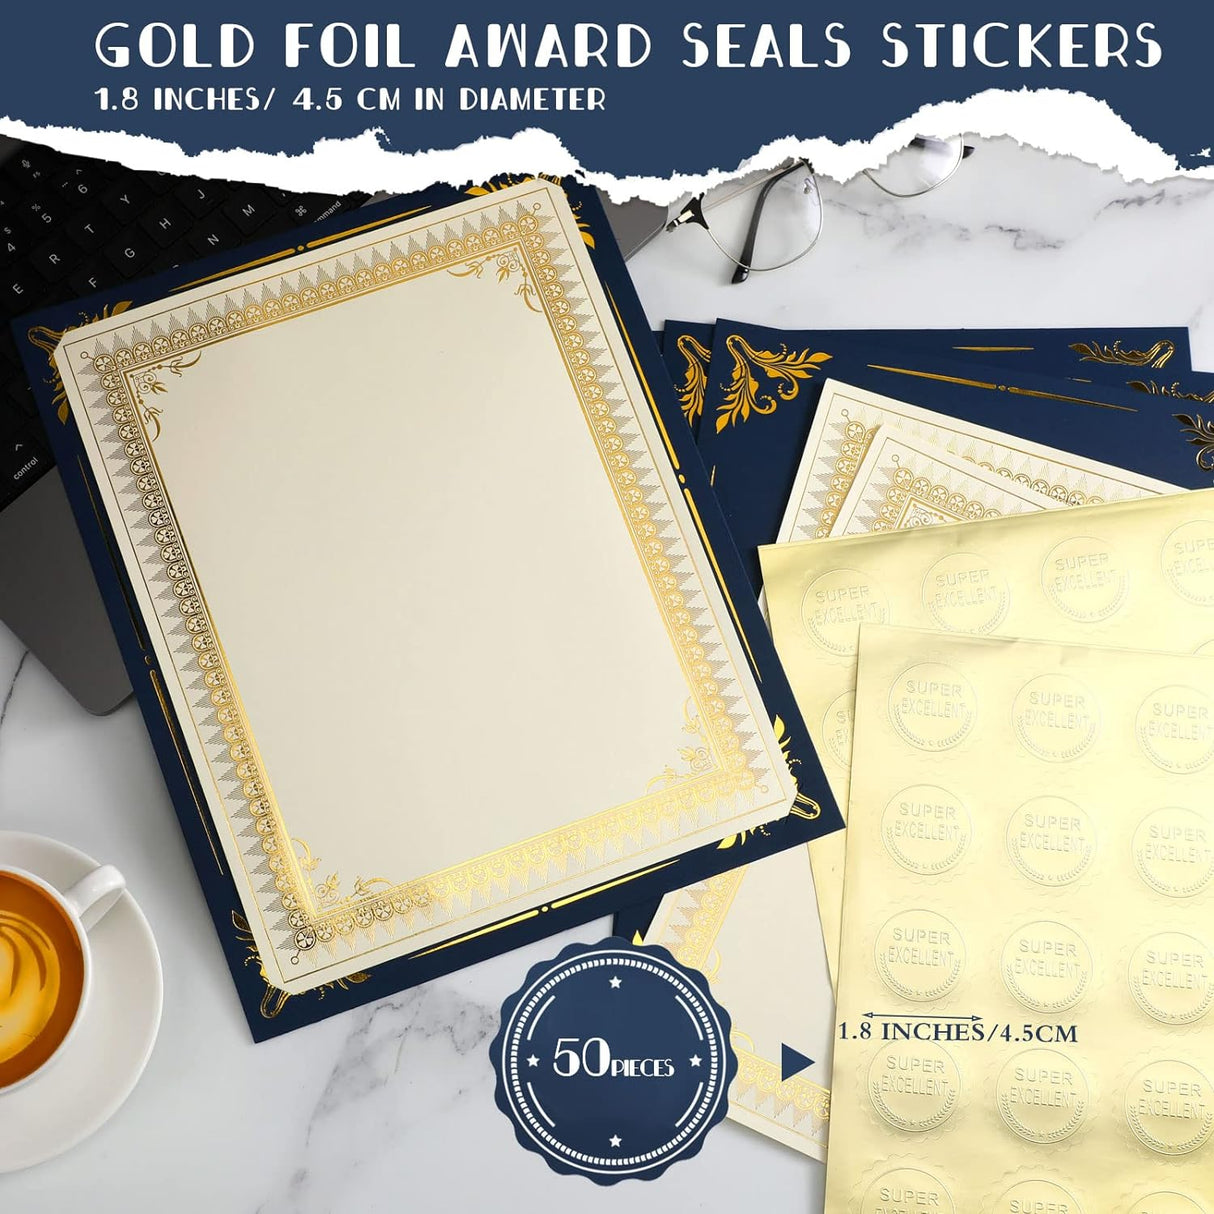 50 Sets Certificate Kit Includes 50 Pcs 9.5 X 12 Inch Certificate Holders 50 Pcs Letter Size Certificate Papers 50 Pcs Gold Foil Award Seals Diploma Covers for Appreciation (Navy Blue, Gold)